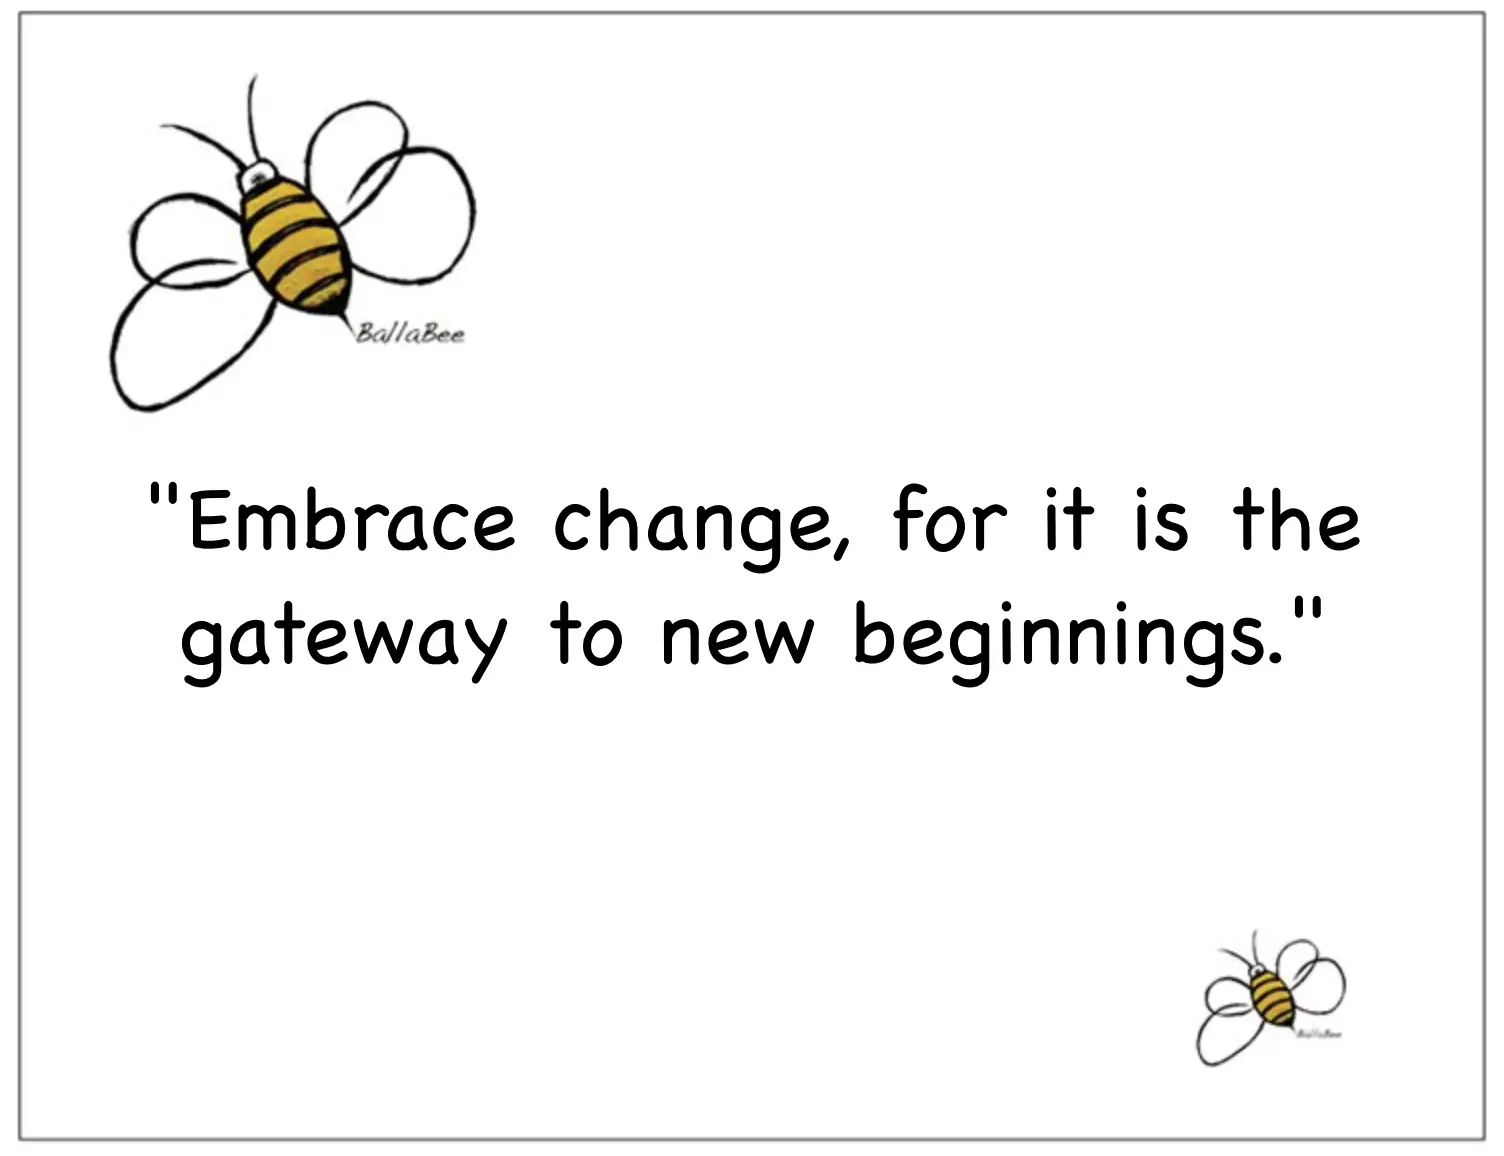 Embrace change, for it is the gateway to new beginnings